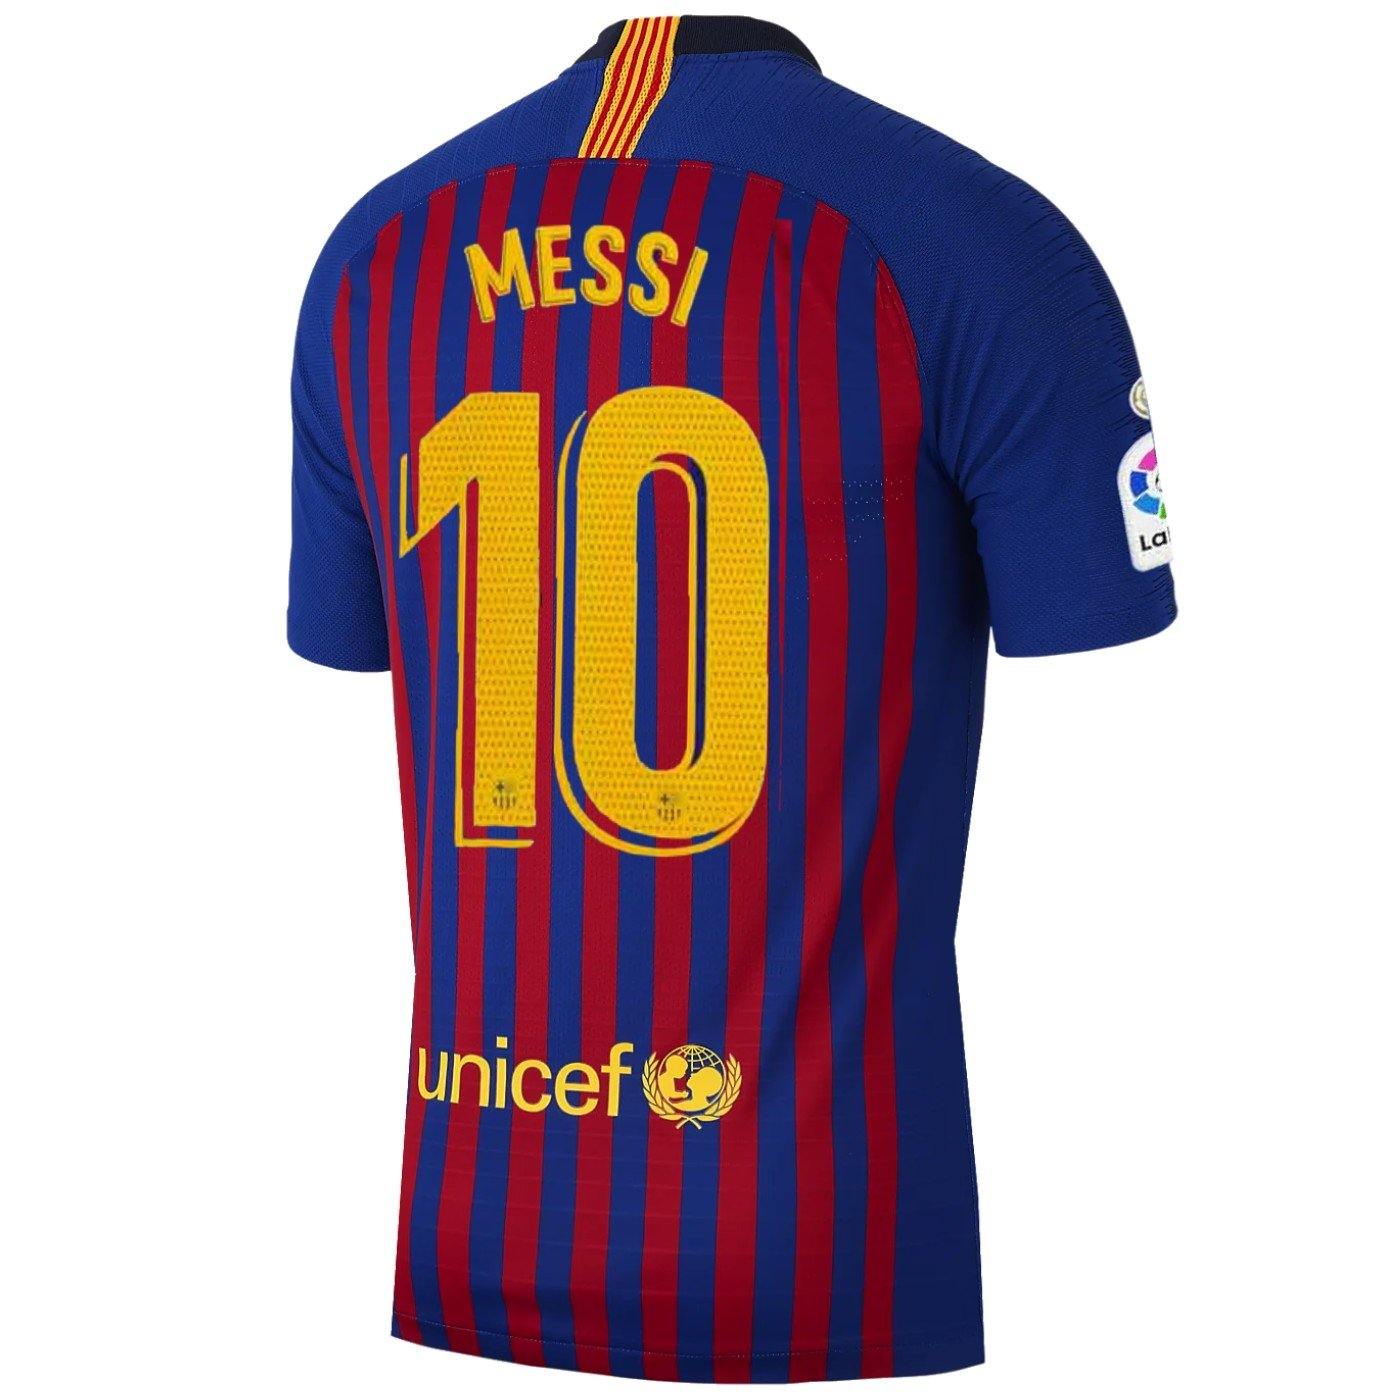 2018 messi jersey